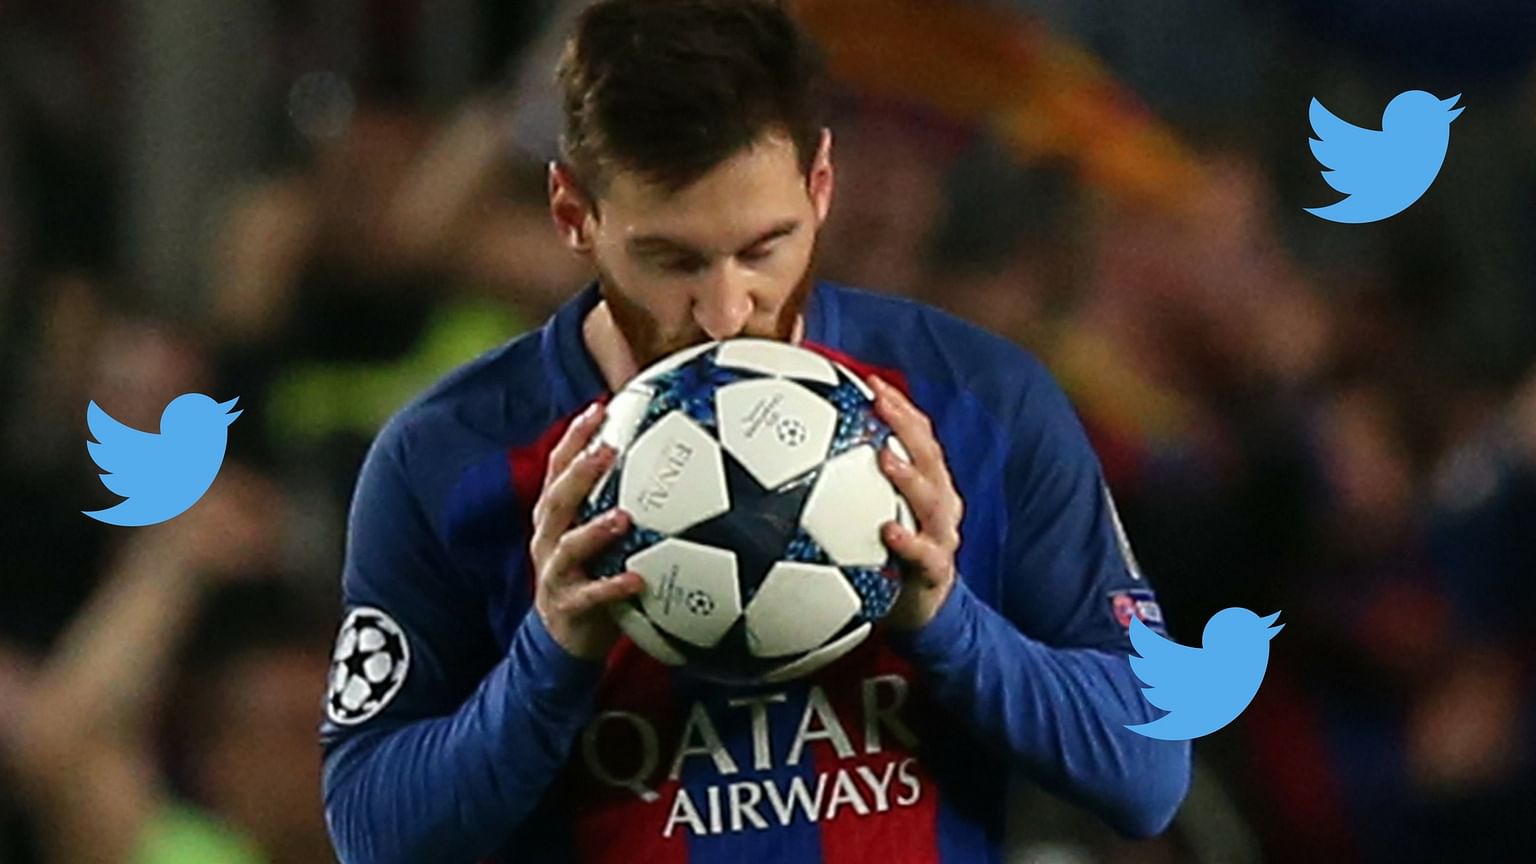 Barcelona’s Lionel Messi celebrates after scoring his side’s third goal in the Champions League round of 16 match against PSG. (Photo: Reuters)